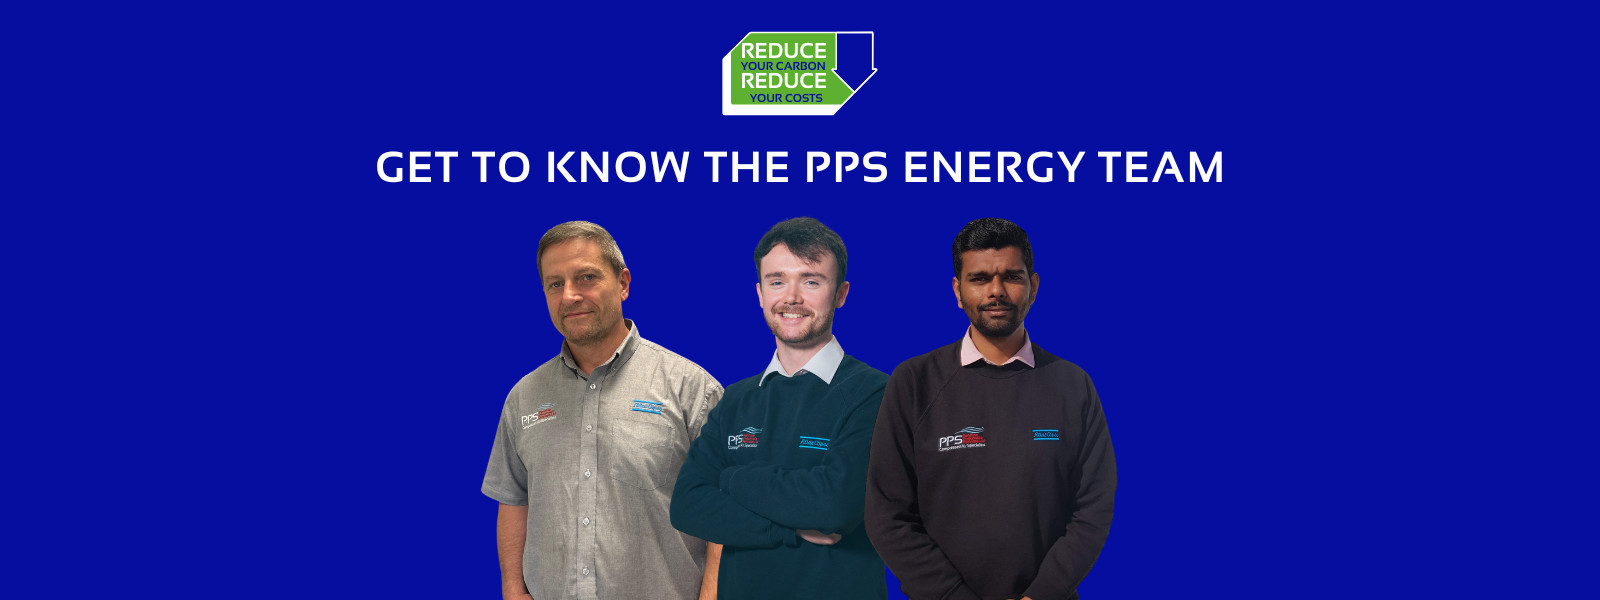 Get to know the PPS Energy Team